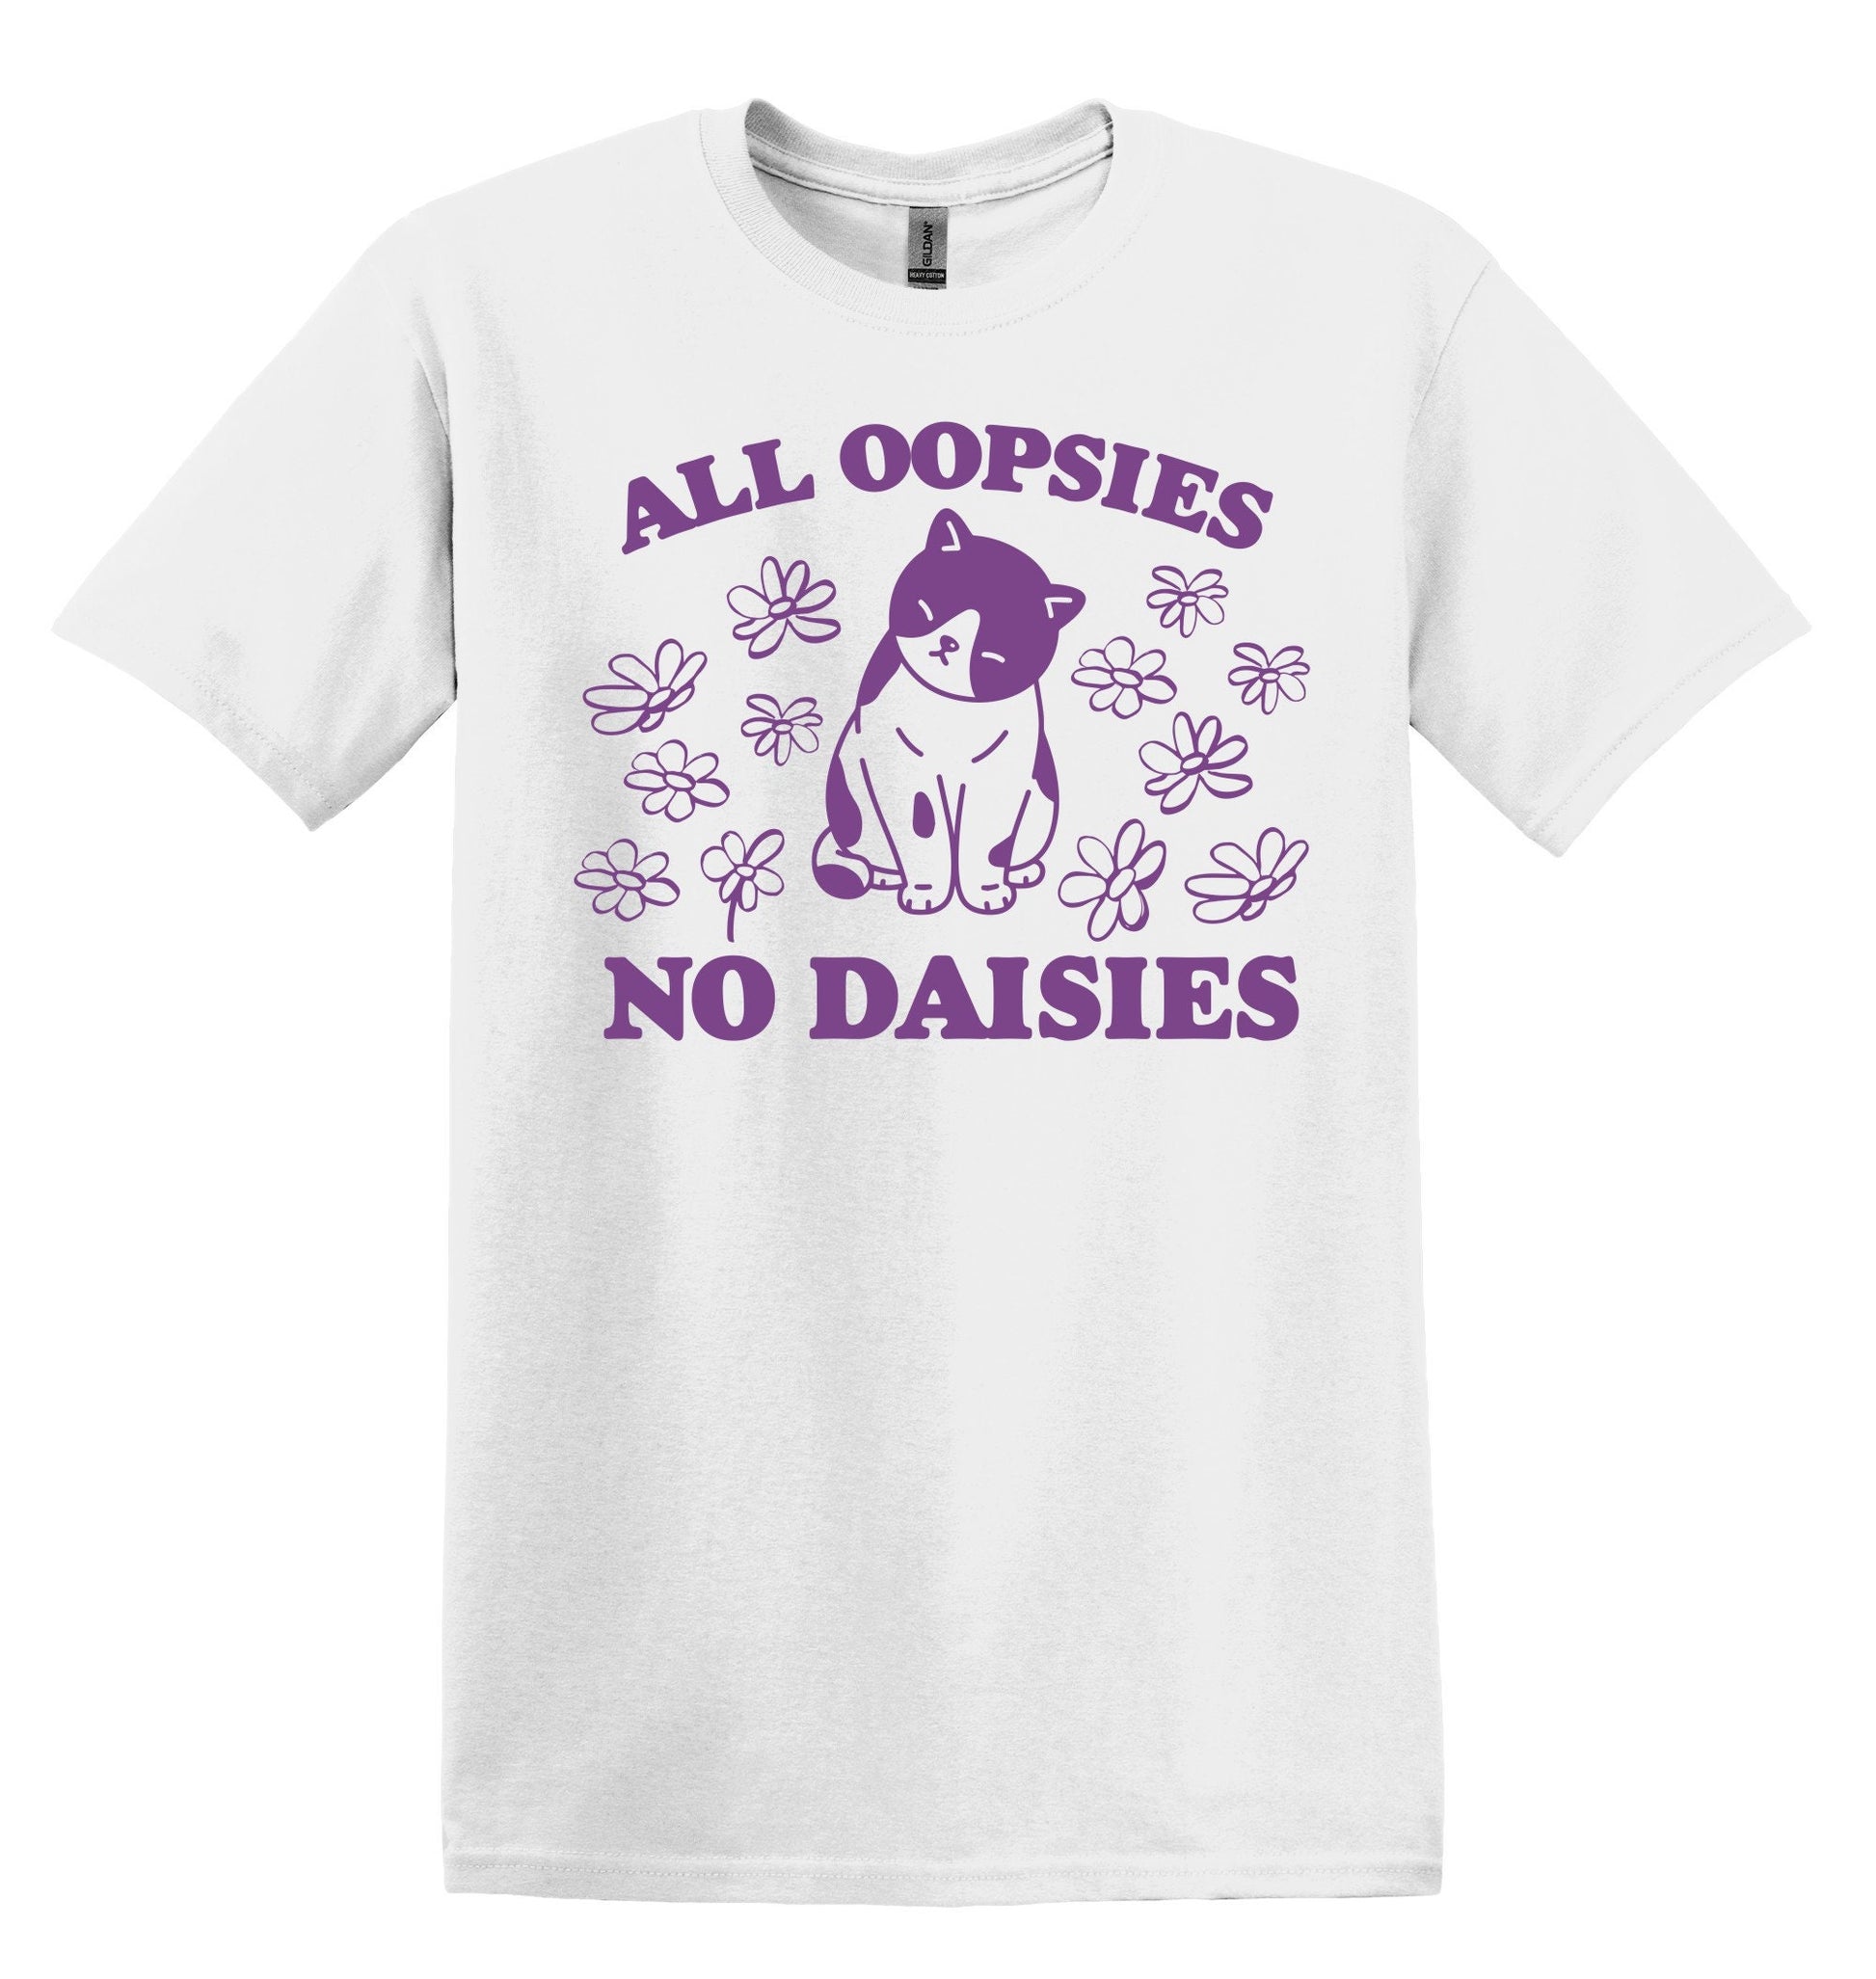 All Oopsies No Daisies Cat Shirt - Funny Graphic Tee